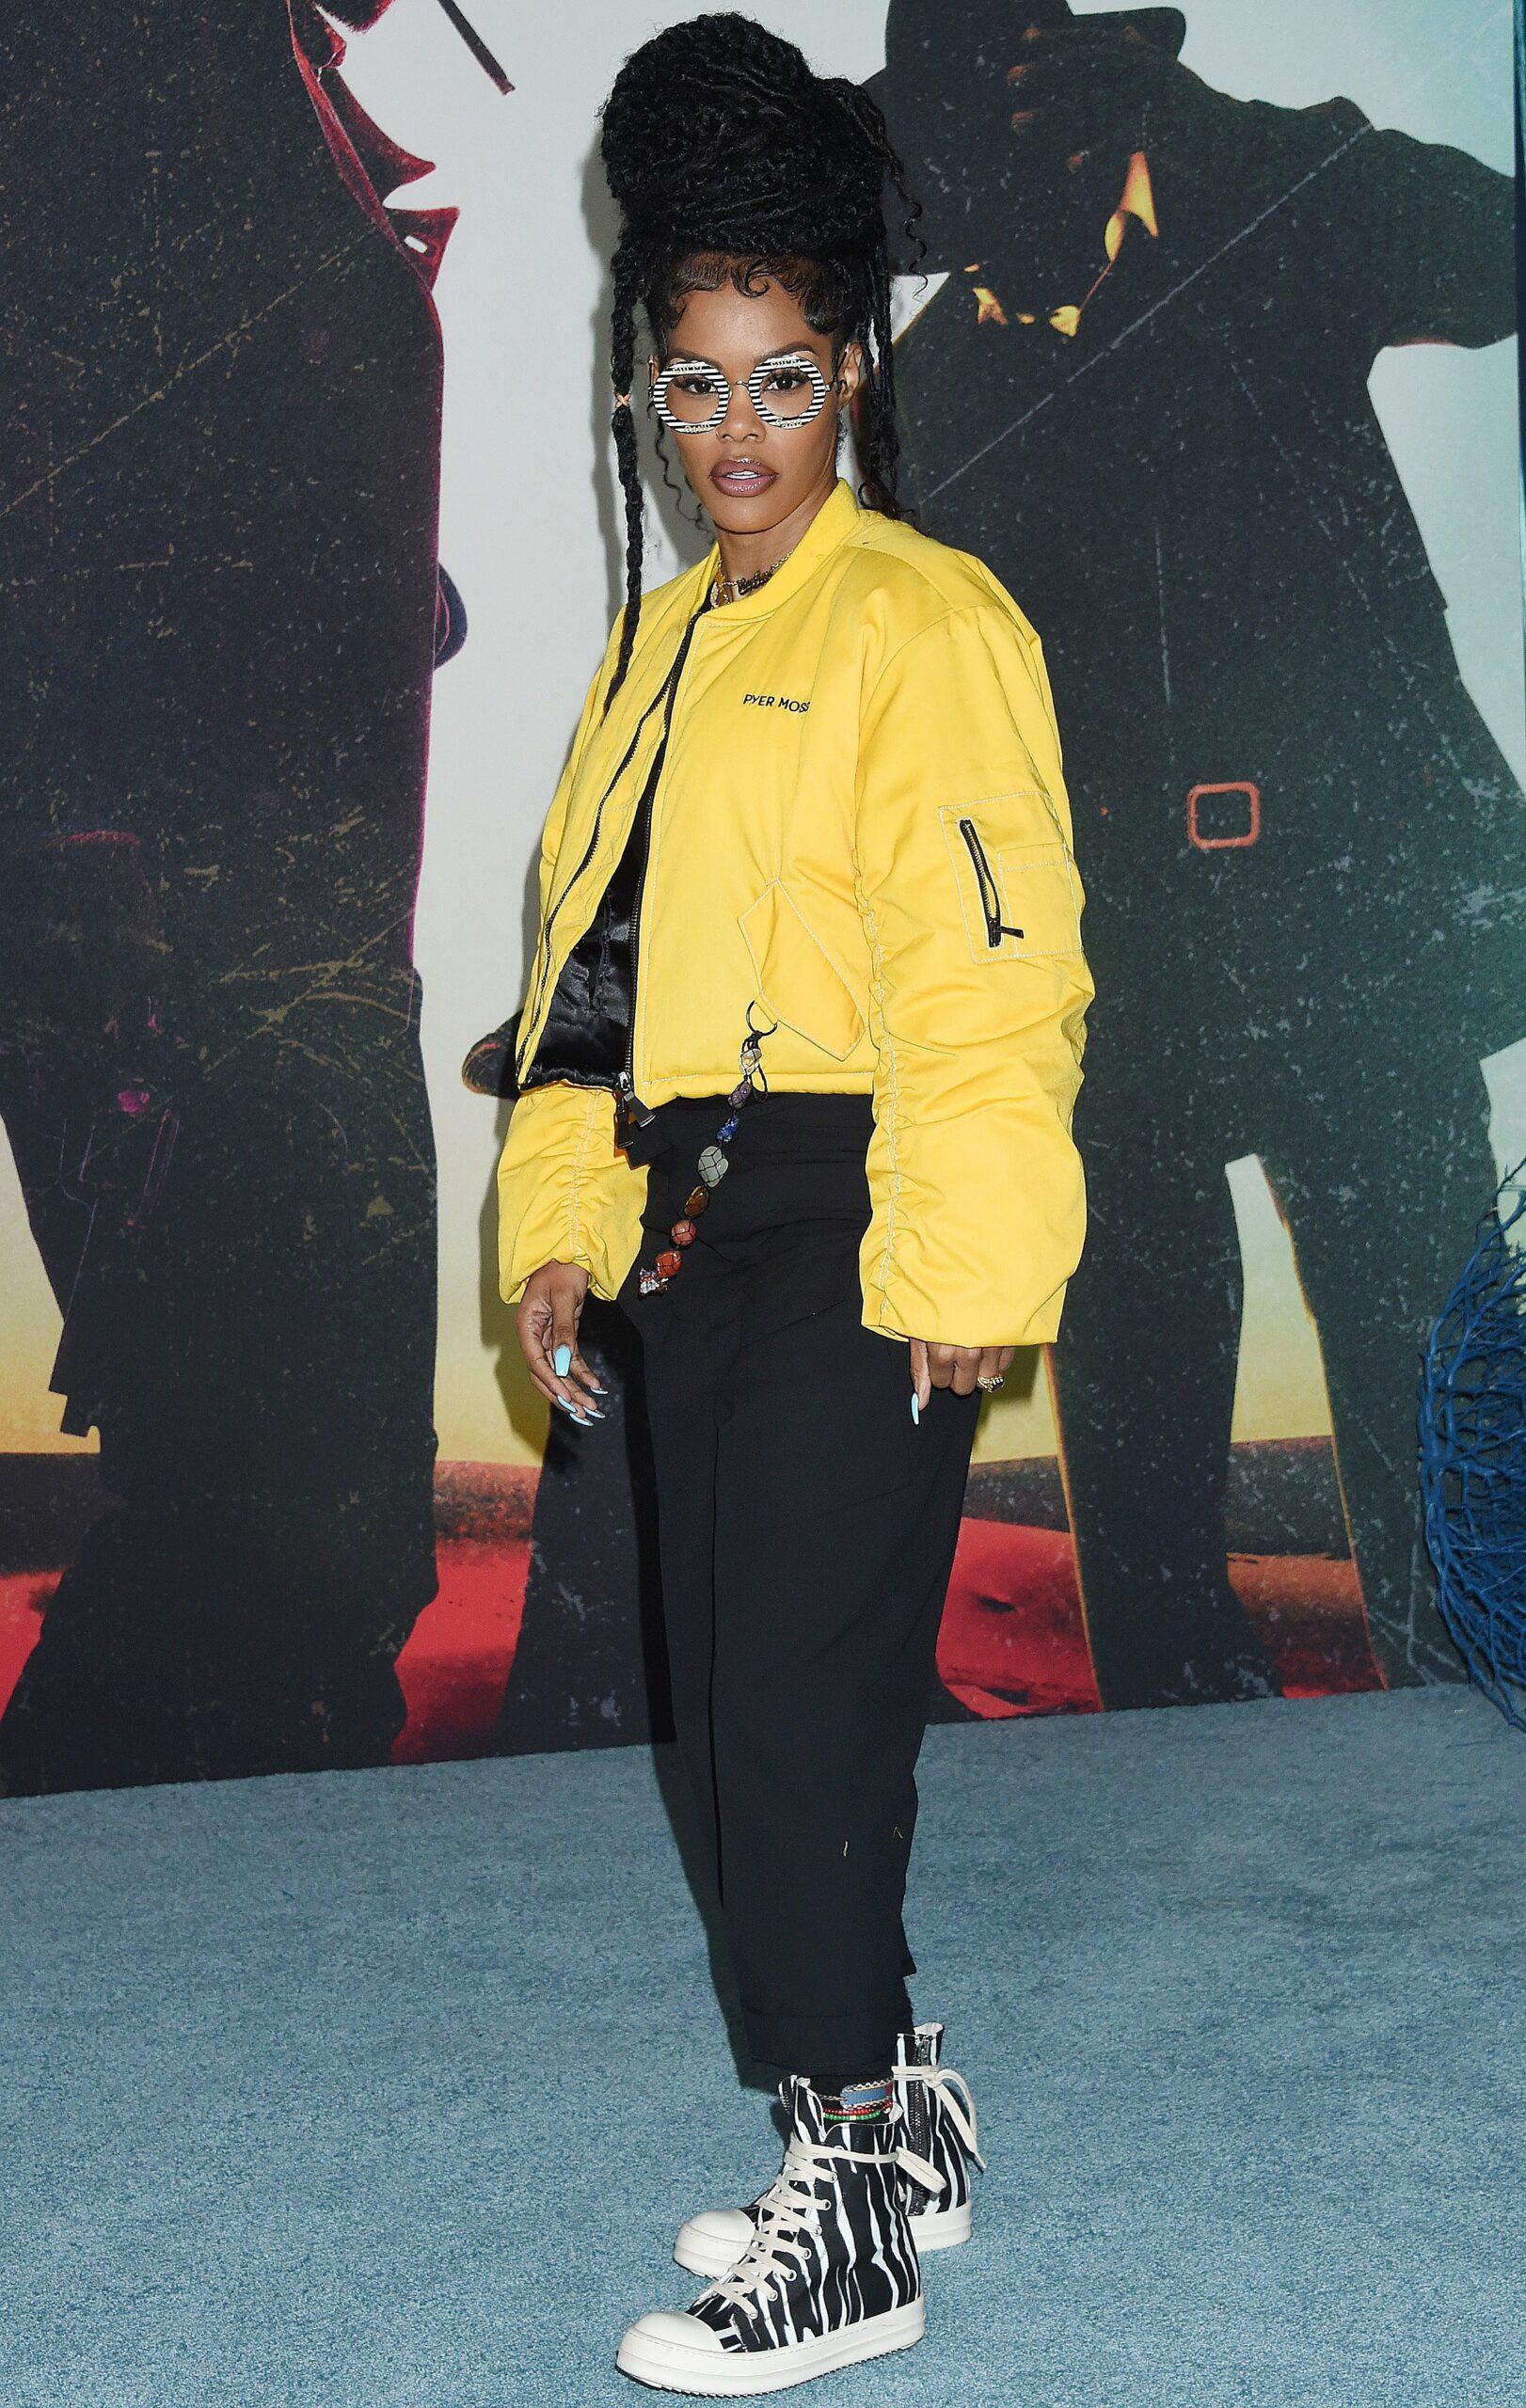 Teyana Taylor at the premiere of The Harder They Fall